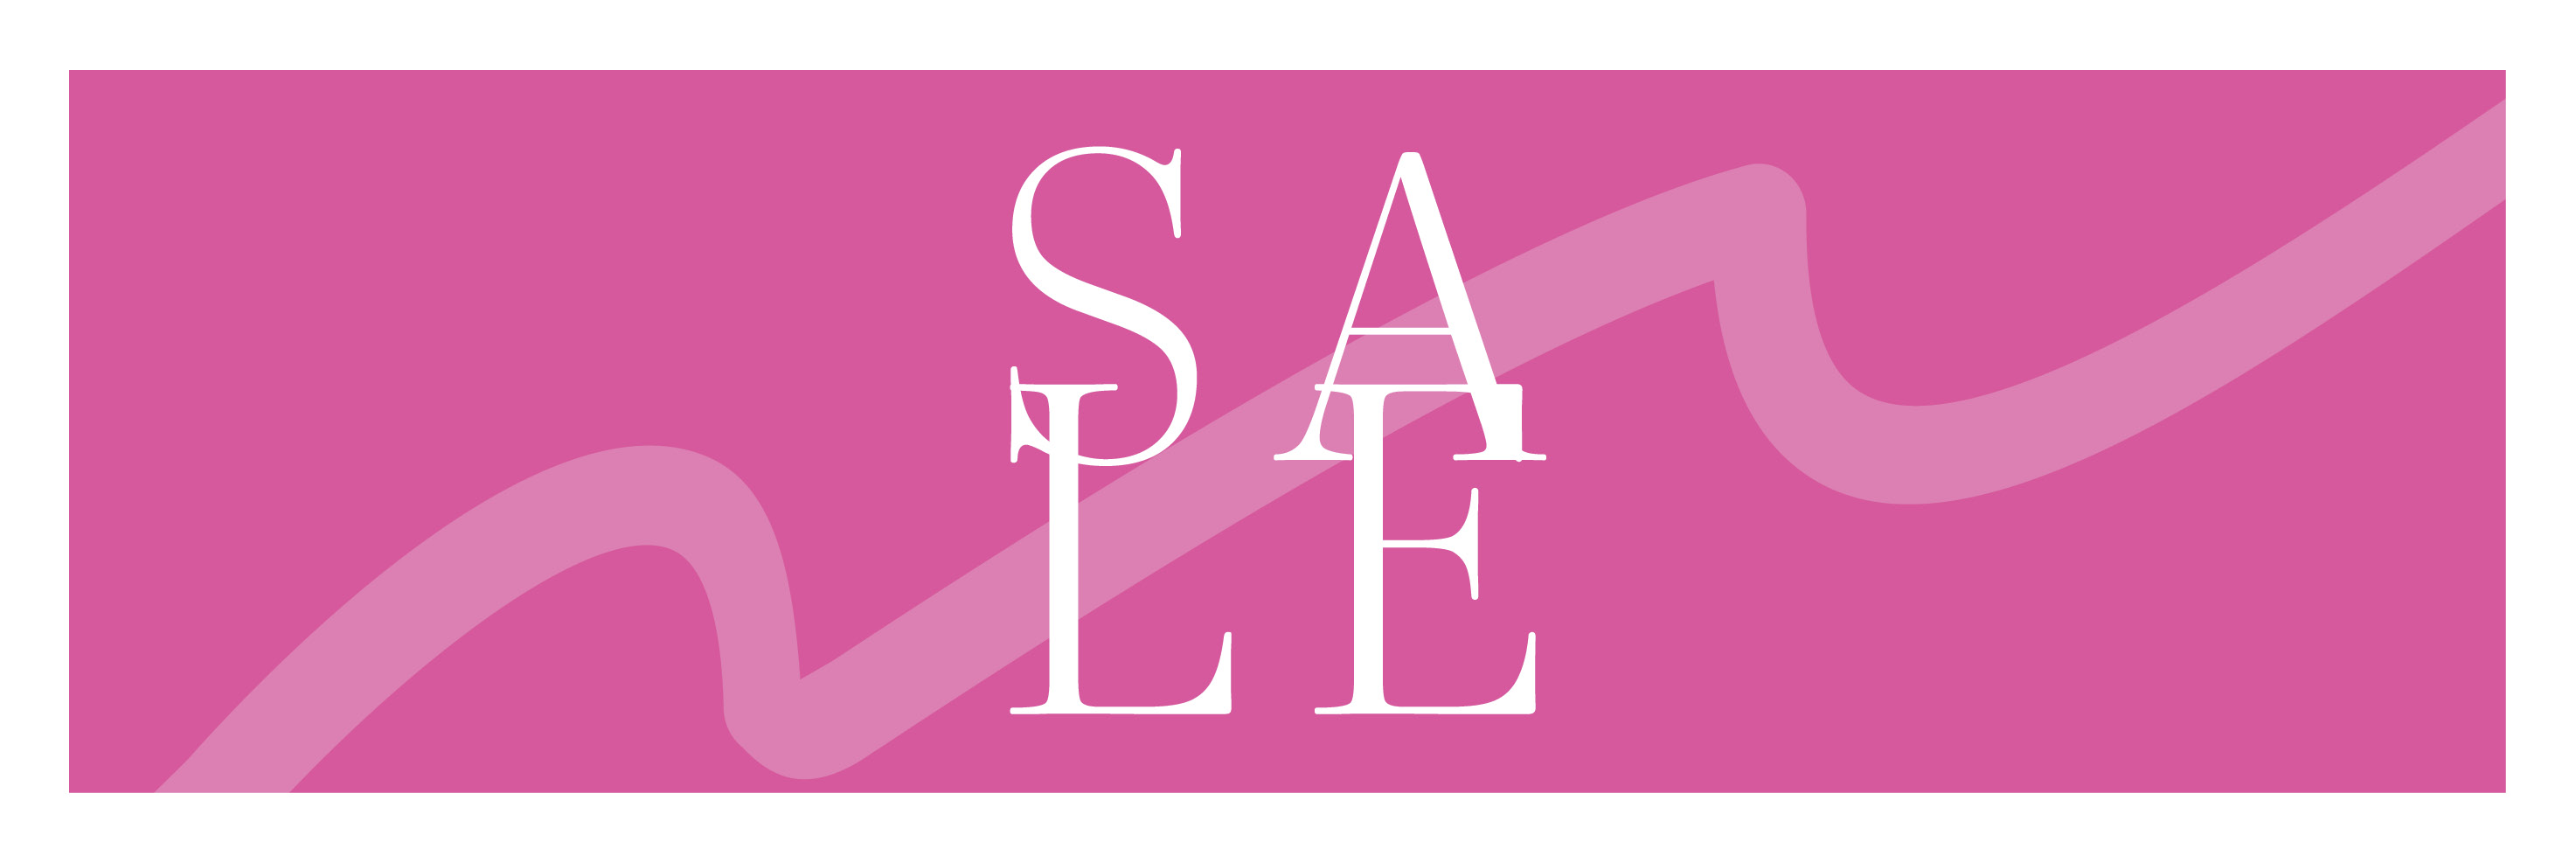 SALE Banner MAGGS